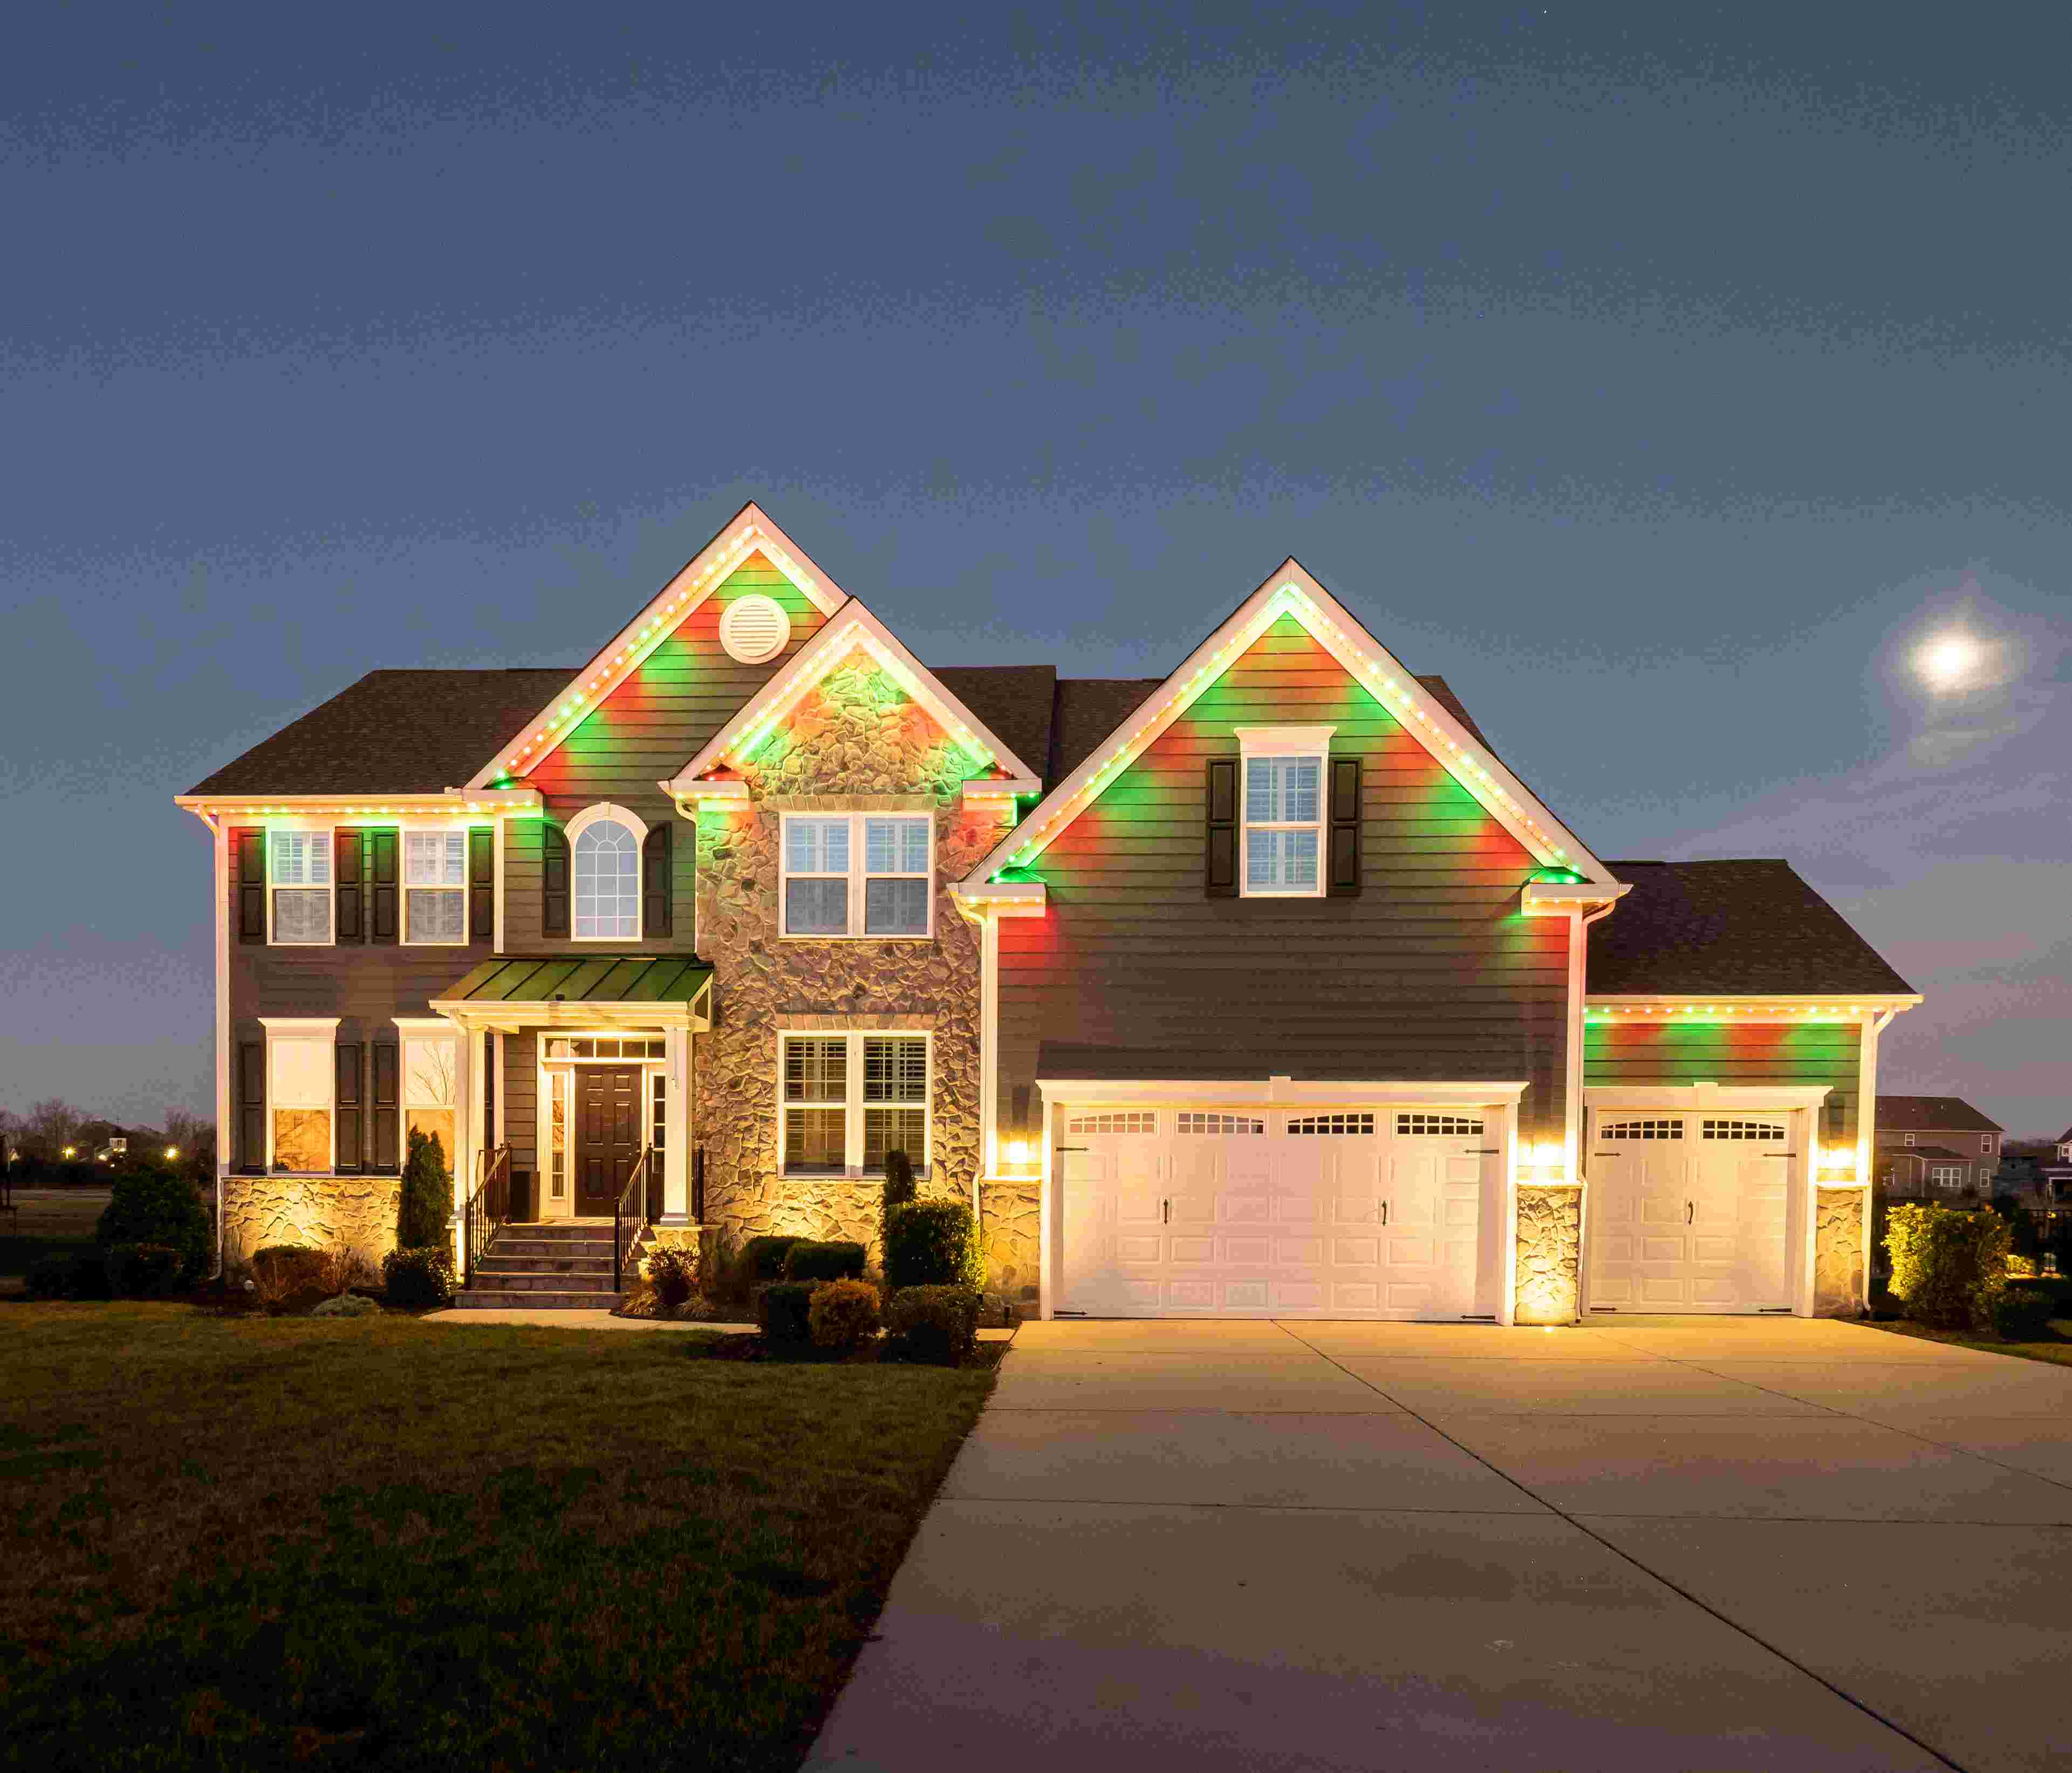 House with red and green light